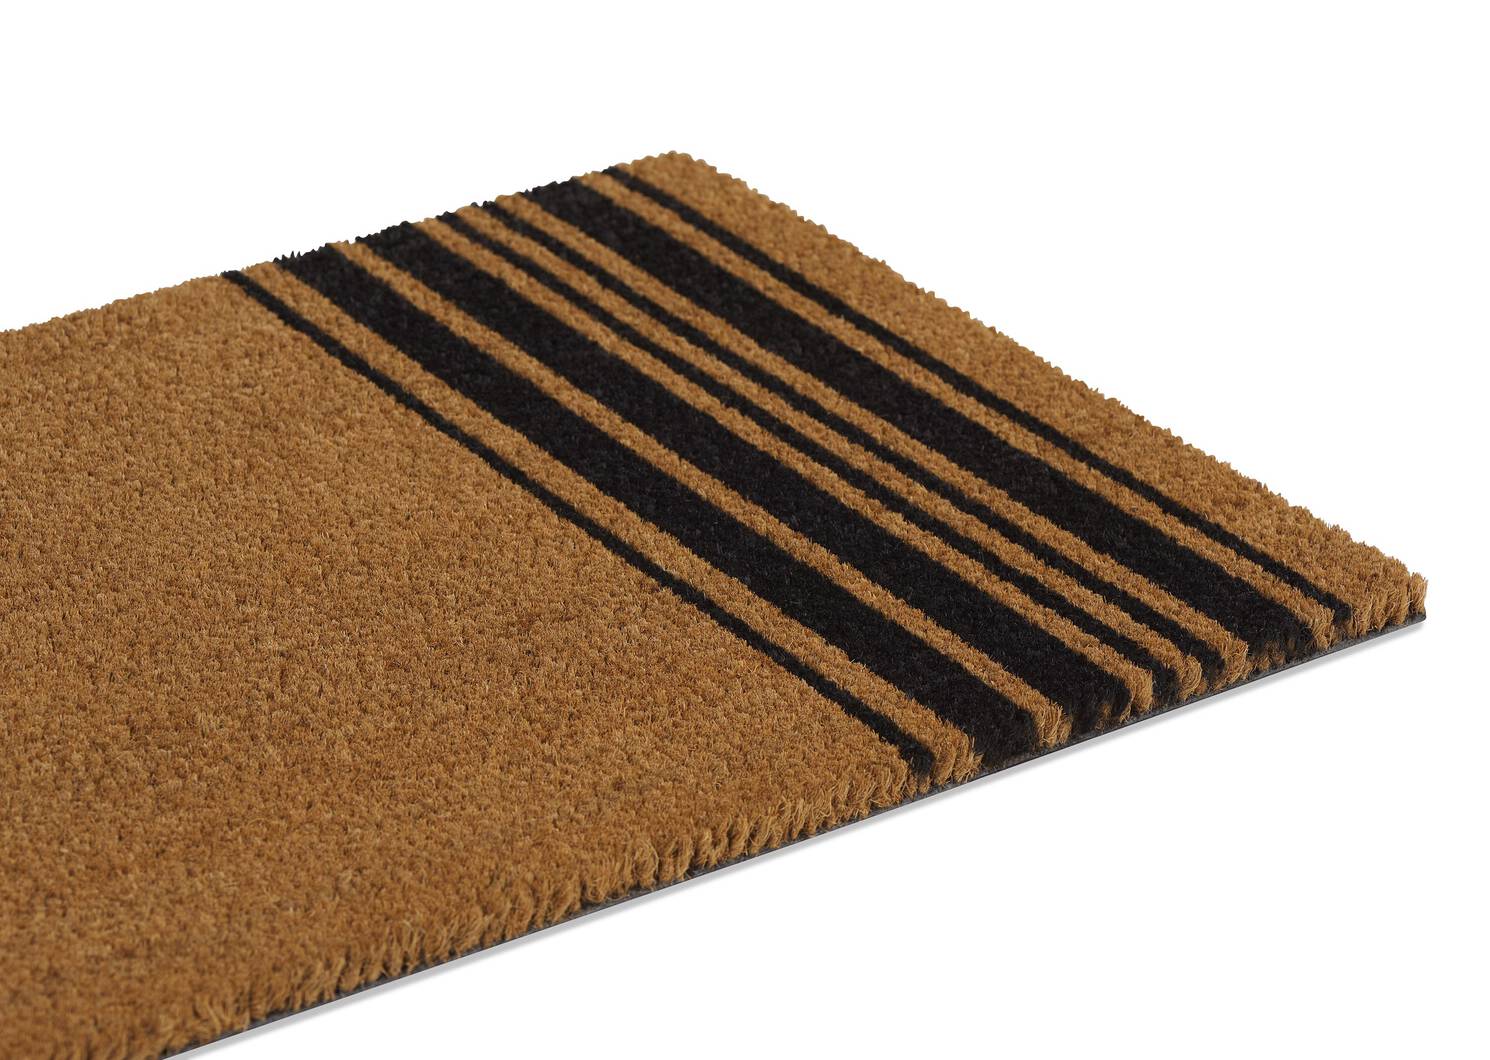 French Stripe Doormat Natural